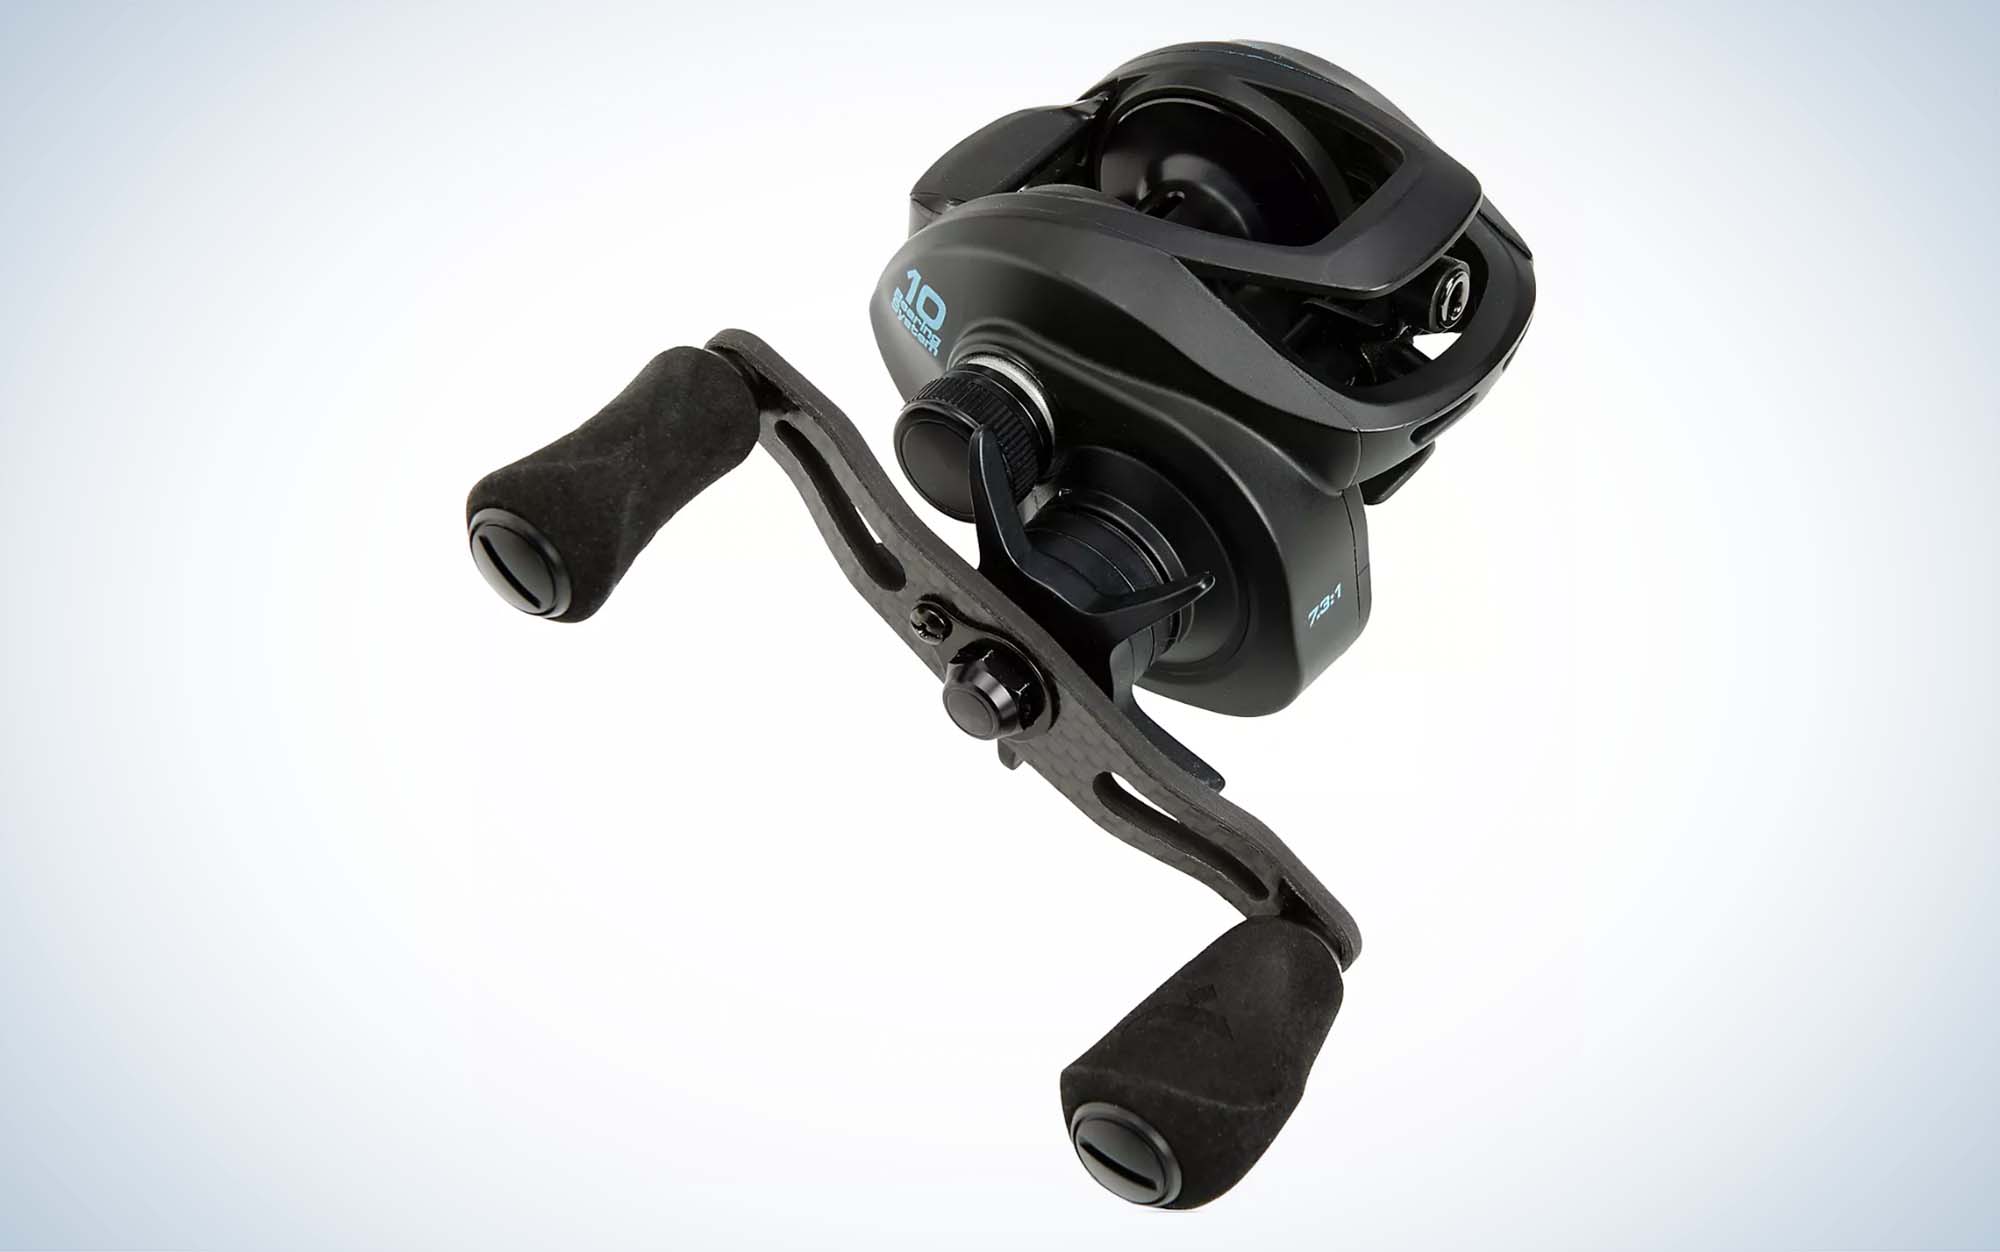 The H2Ox is used by top pros and is baitcasting reel under $100